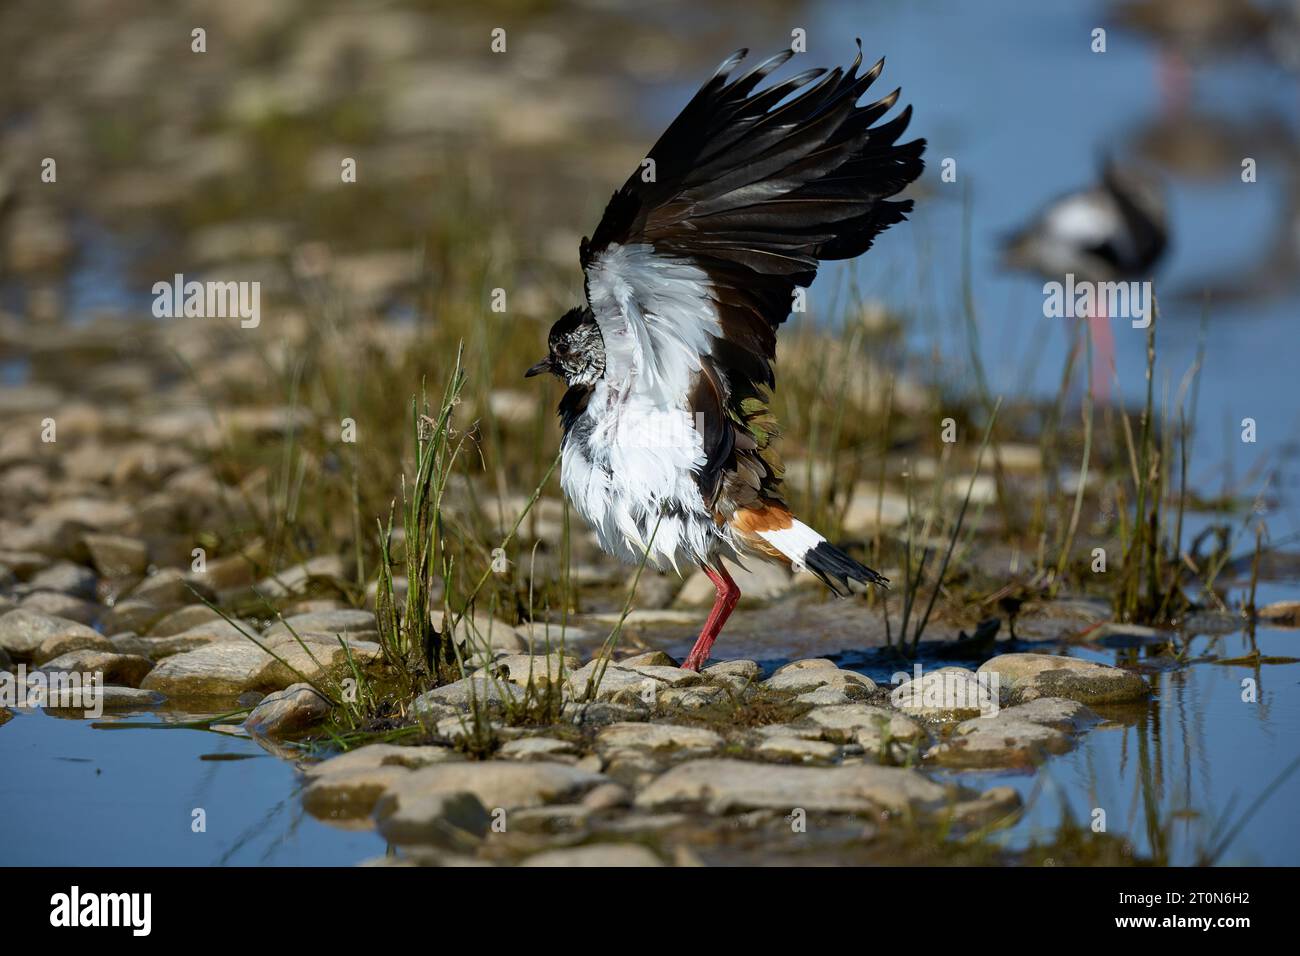 Lapwing at a bathing pool Stock Photo